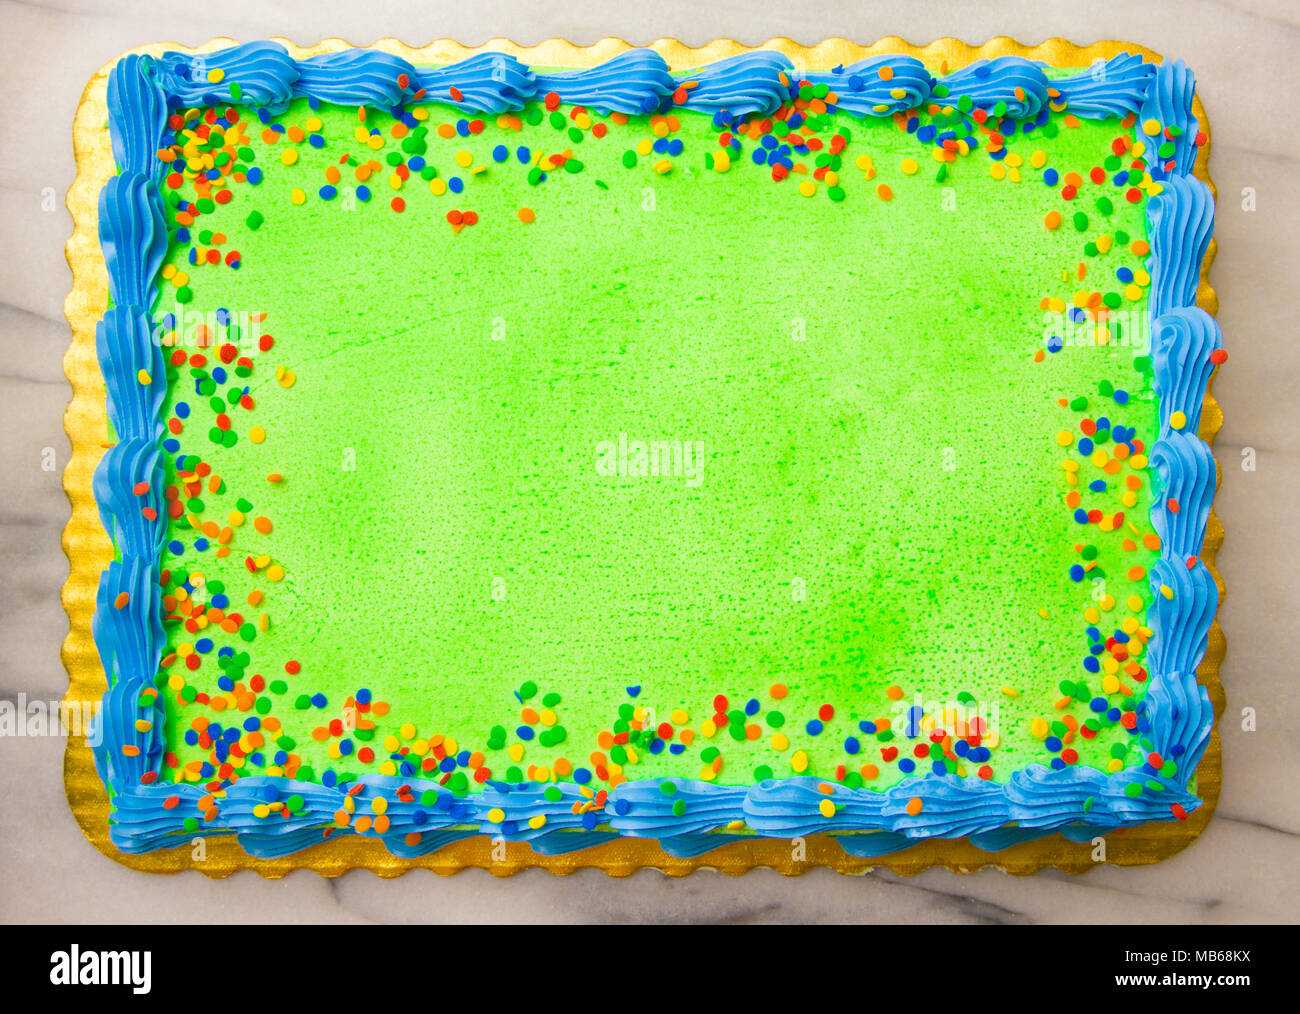 Blank Cake - Add your own writting or message Stock Photo